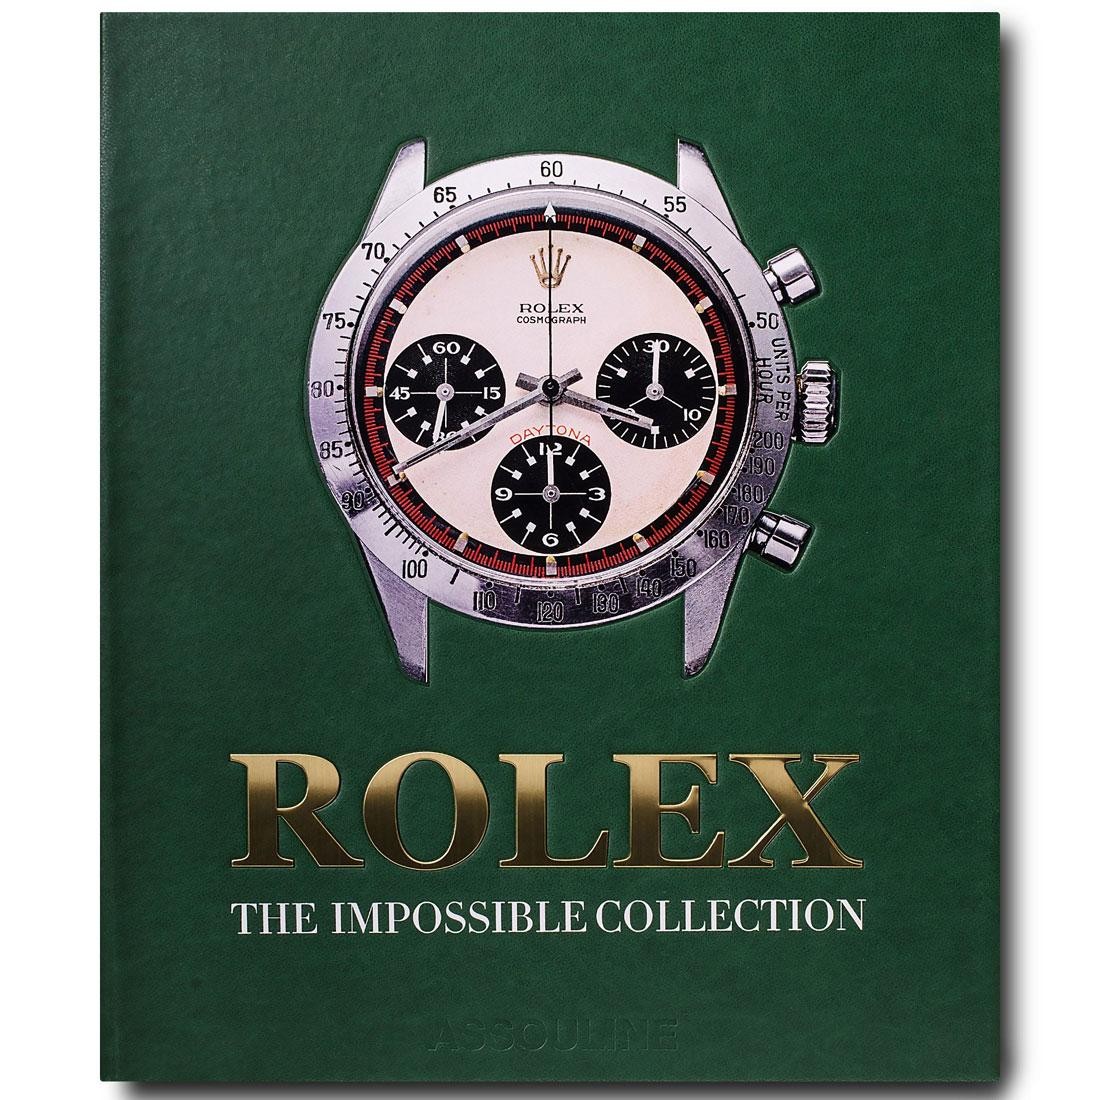 Rolex: The Impossible Collection Book (green / hardcover)